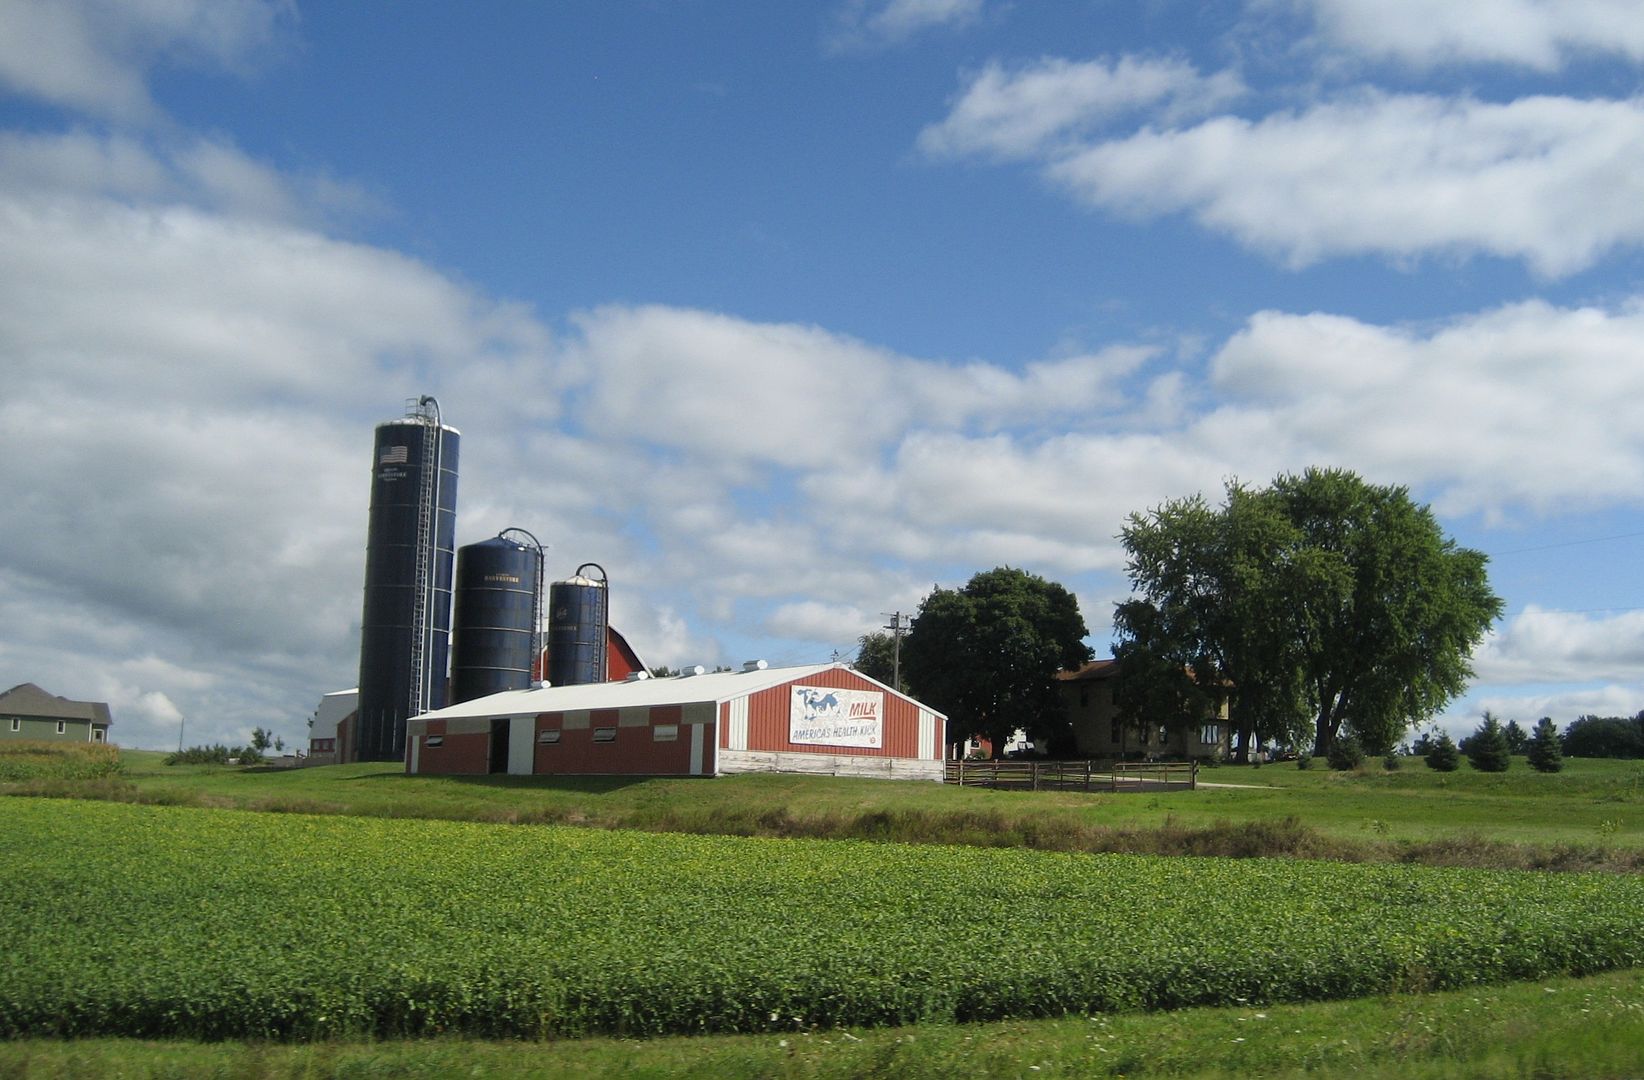 Pretty much every meal Ive had in Wisconsin has involved cheese of some form - and I LIKE IT!  Wisconsin is full of beautiful landscapes such as this dairy farm just outside of Oconomowoc.